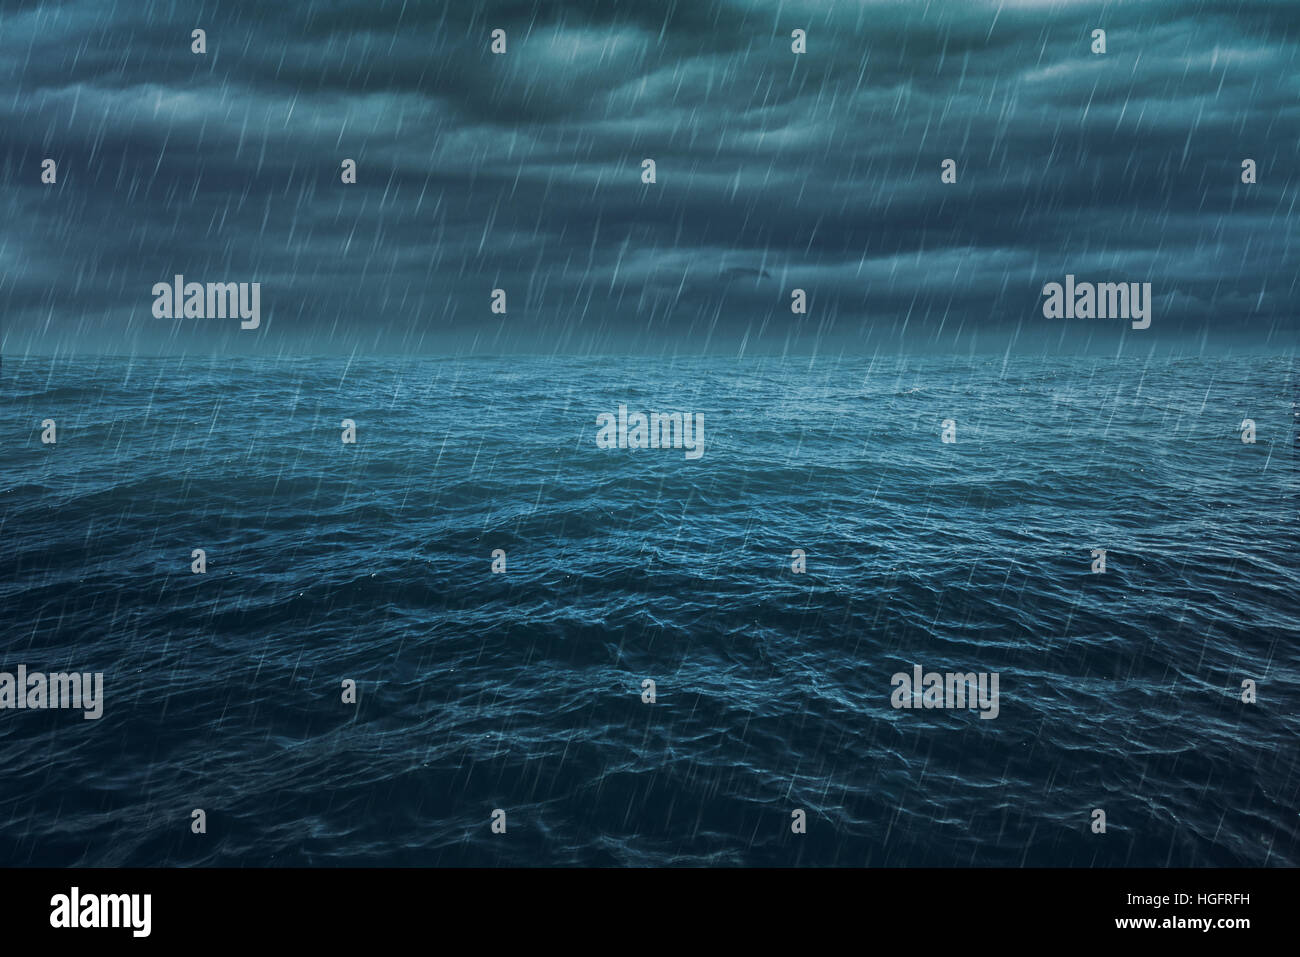 Rain over the stormy sea, abstract dark background. Stock Photo